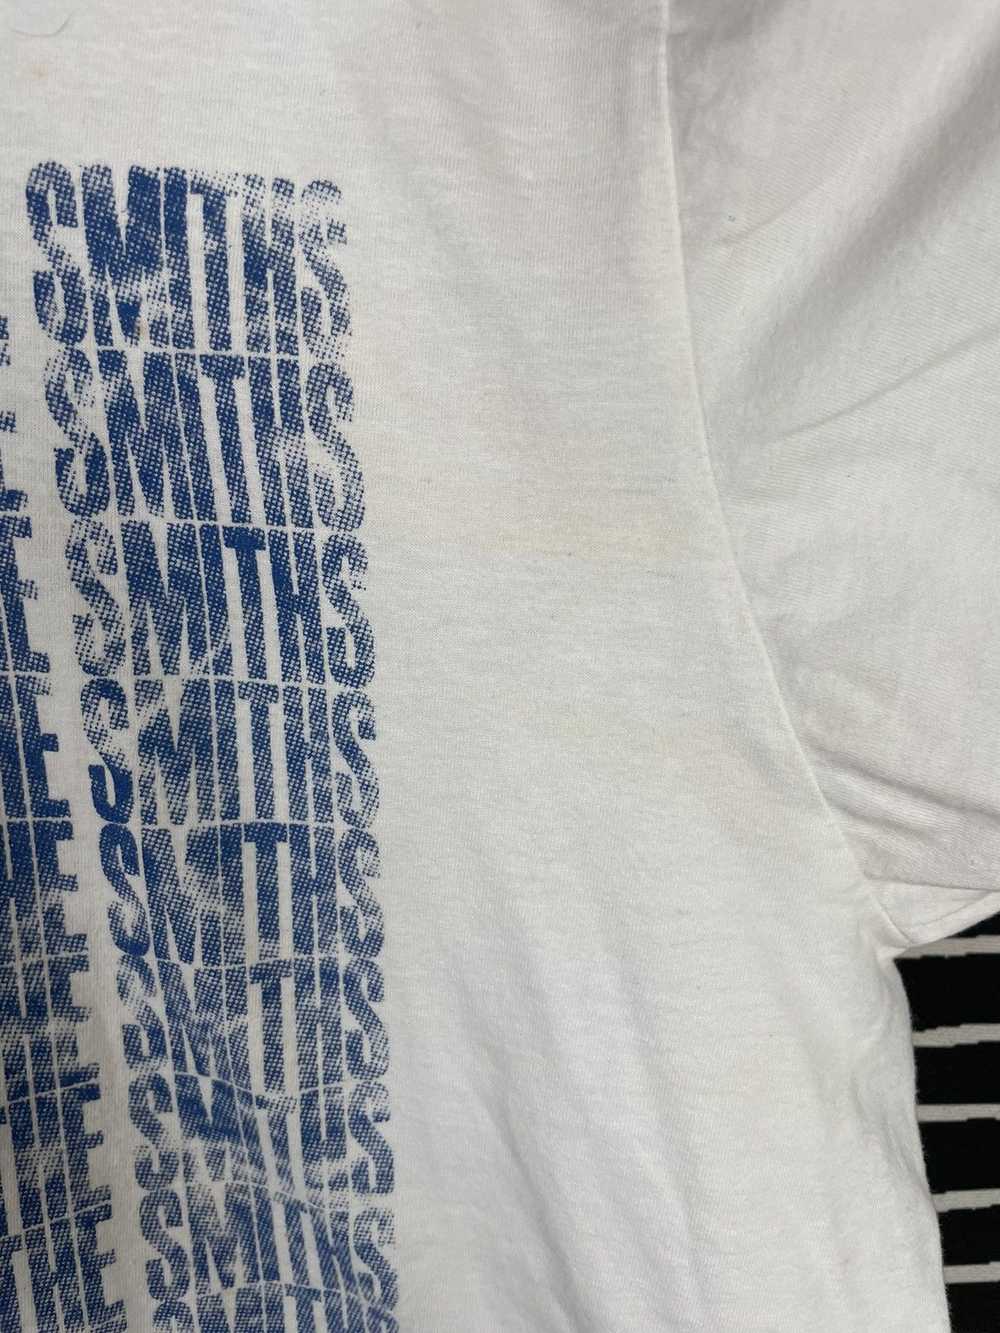 Band Tees × Rock Band × The Smiths The Smiths Mor… - image 3